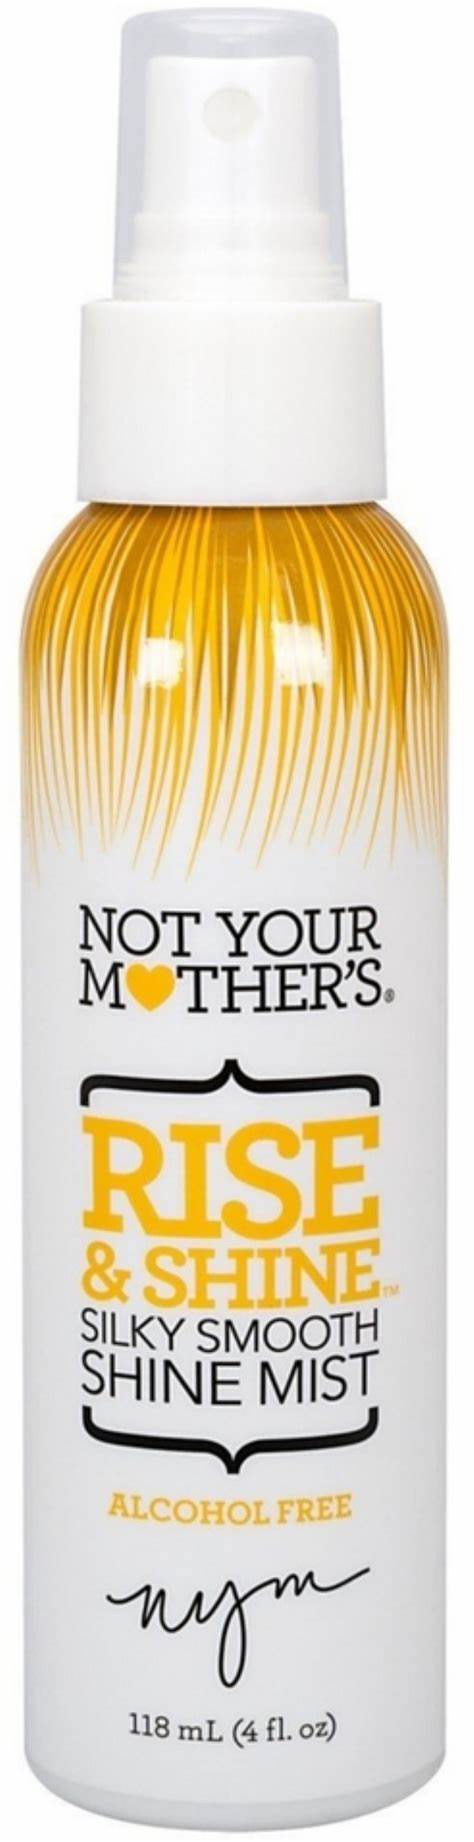 Not Your Mothers Rise & Shine silky smooth shine mist